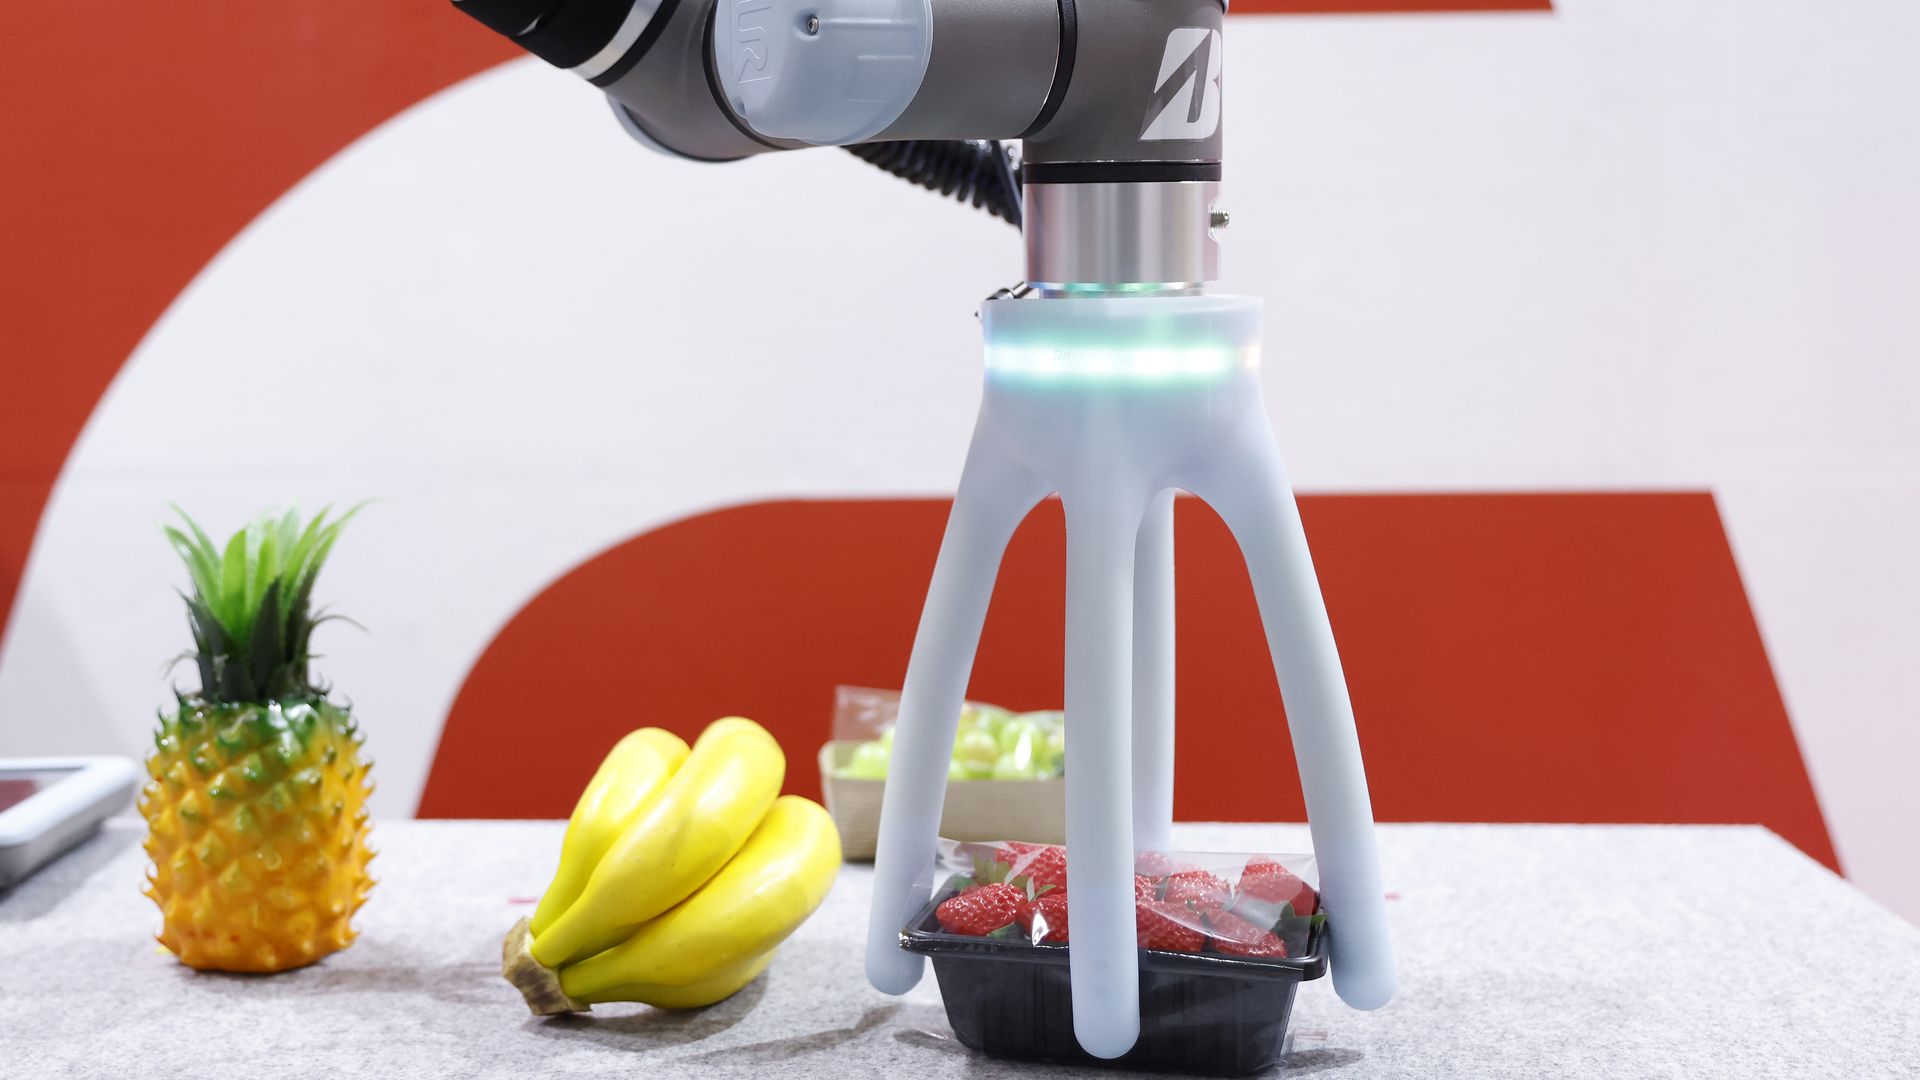 A soft robotic hand grips a container of strawberries